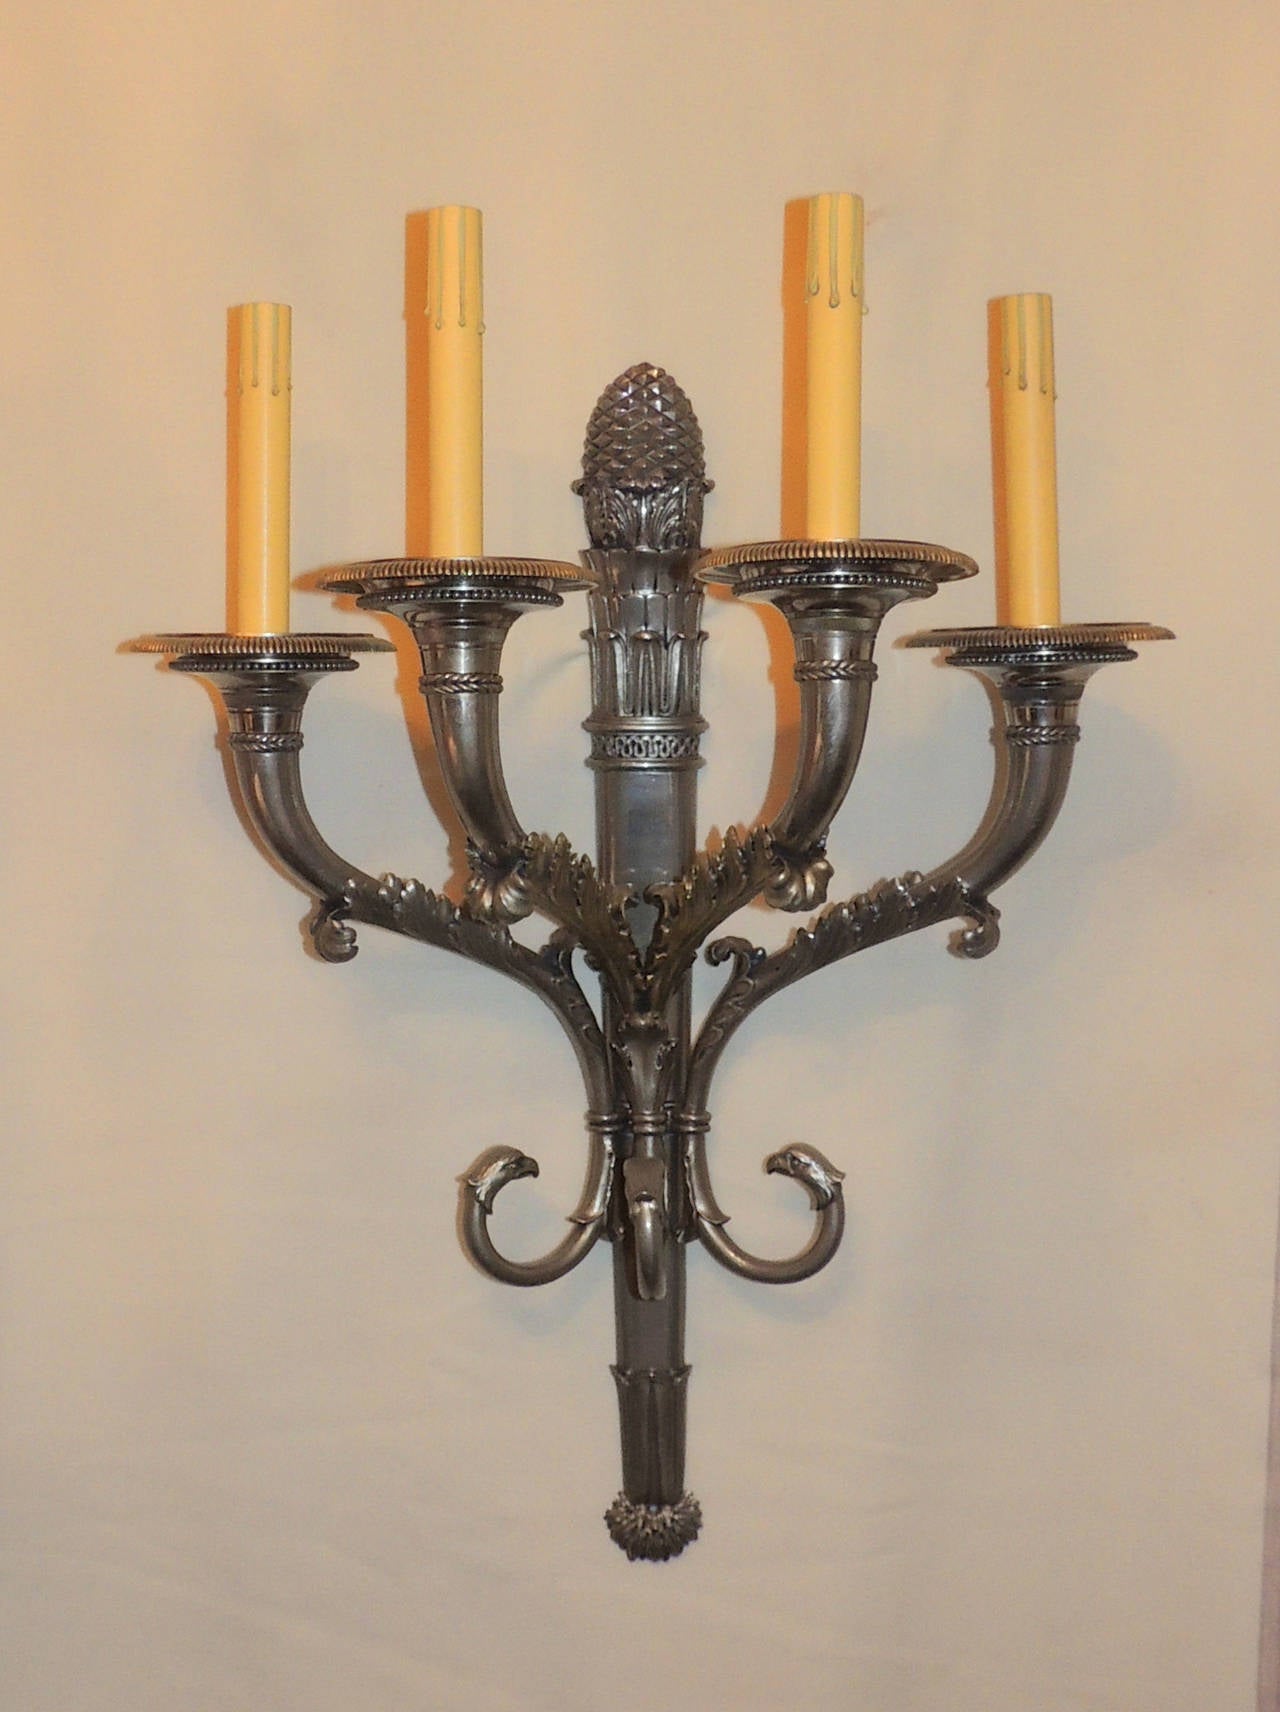 This pair of neoclassical four-arm sconces are beautifully aged silvered bronze with a very wonderful rich patina. Decorating the four arms are beaded trim and floral scrolls embracing the arms. The center of the sconces are detailed with raised